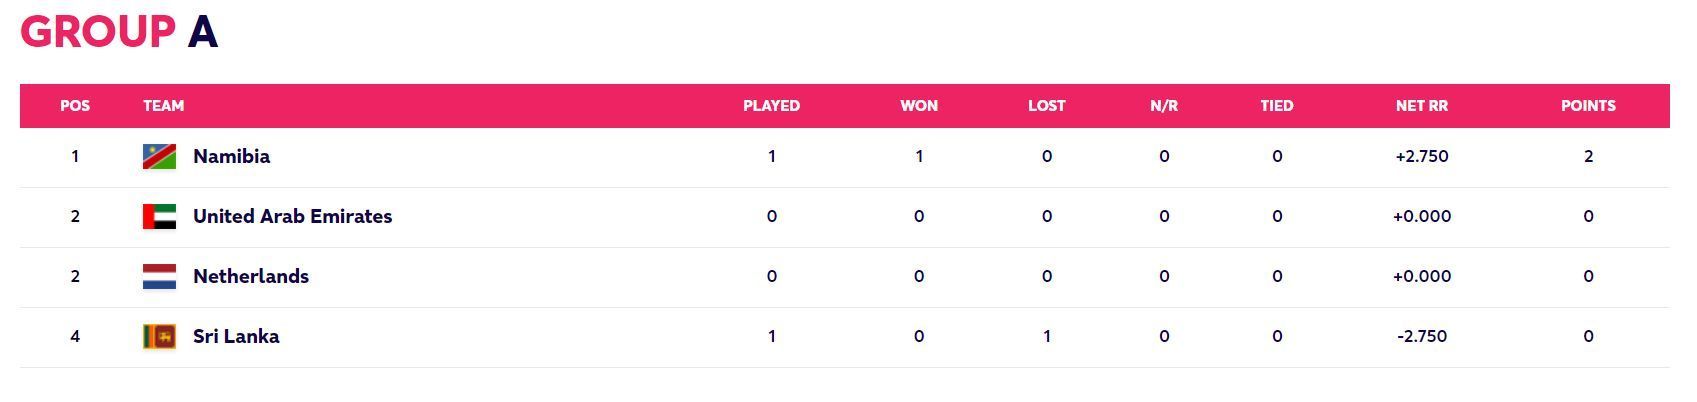 Updated Points Table after Match 1 (Image Courtesy: www.t20worldcup.com)